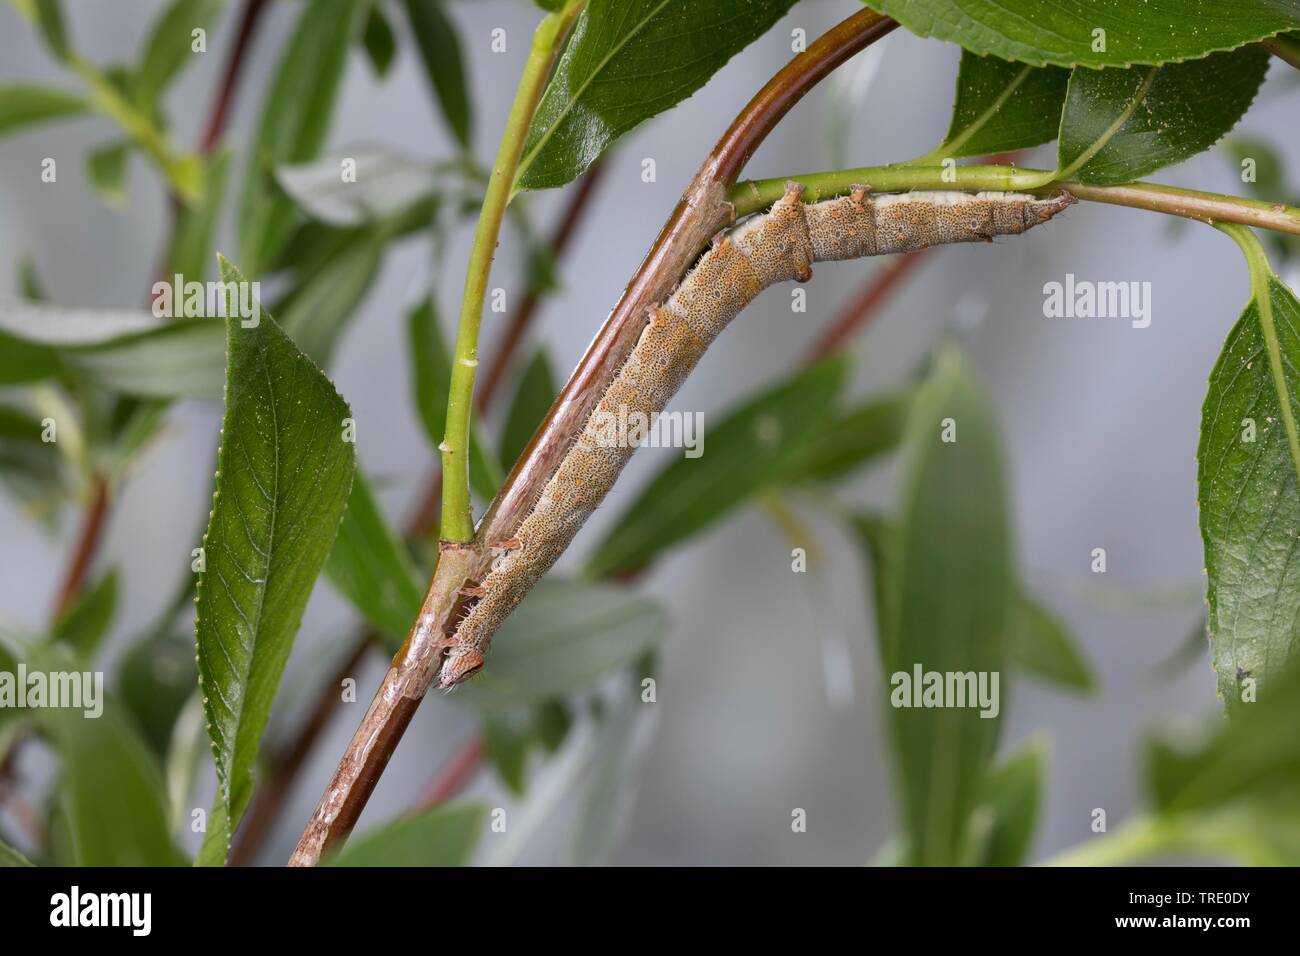 Polish Red (Catocala pacta), young caterpillar feeding on willow, Germany Stock Photo